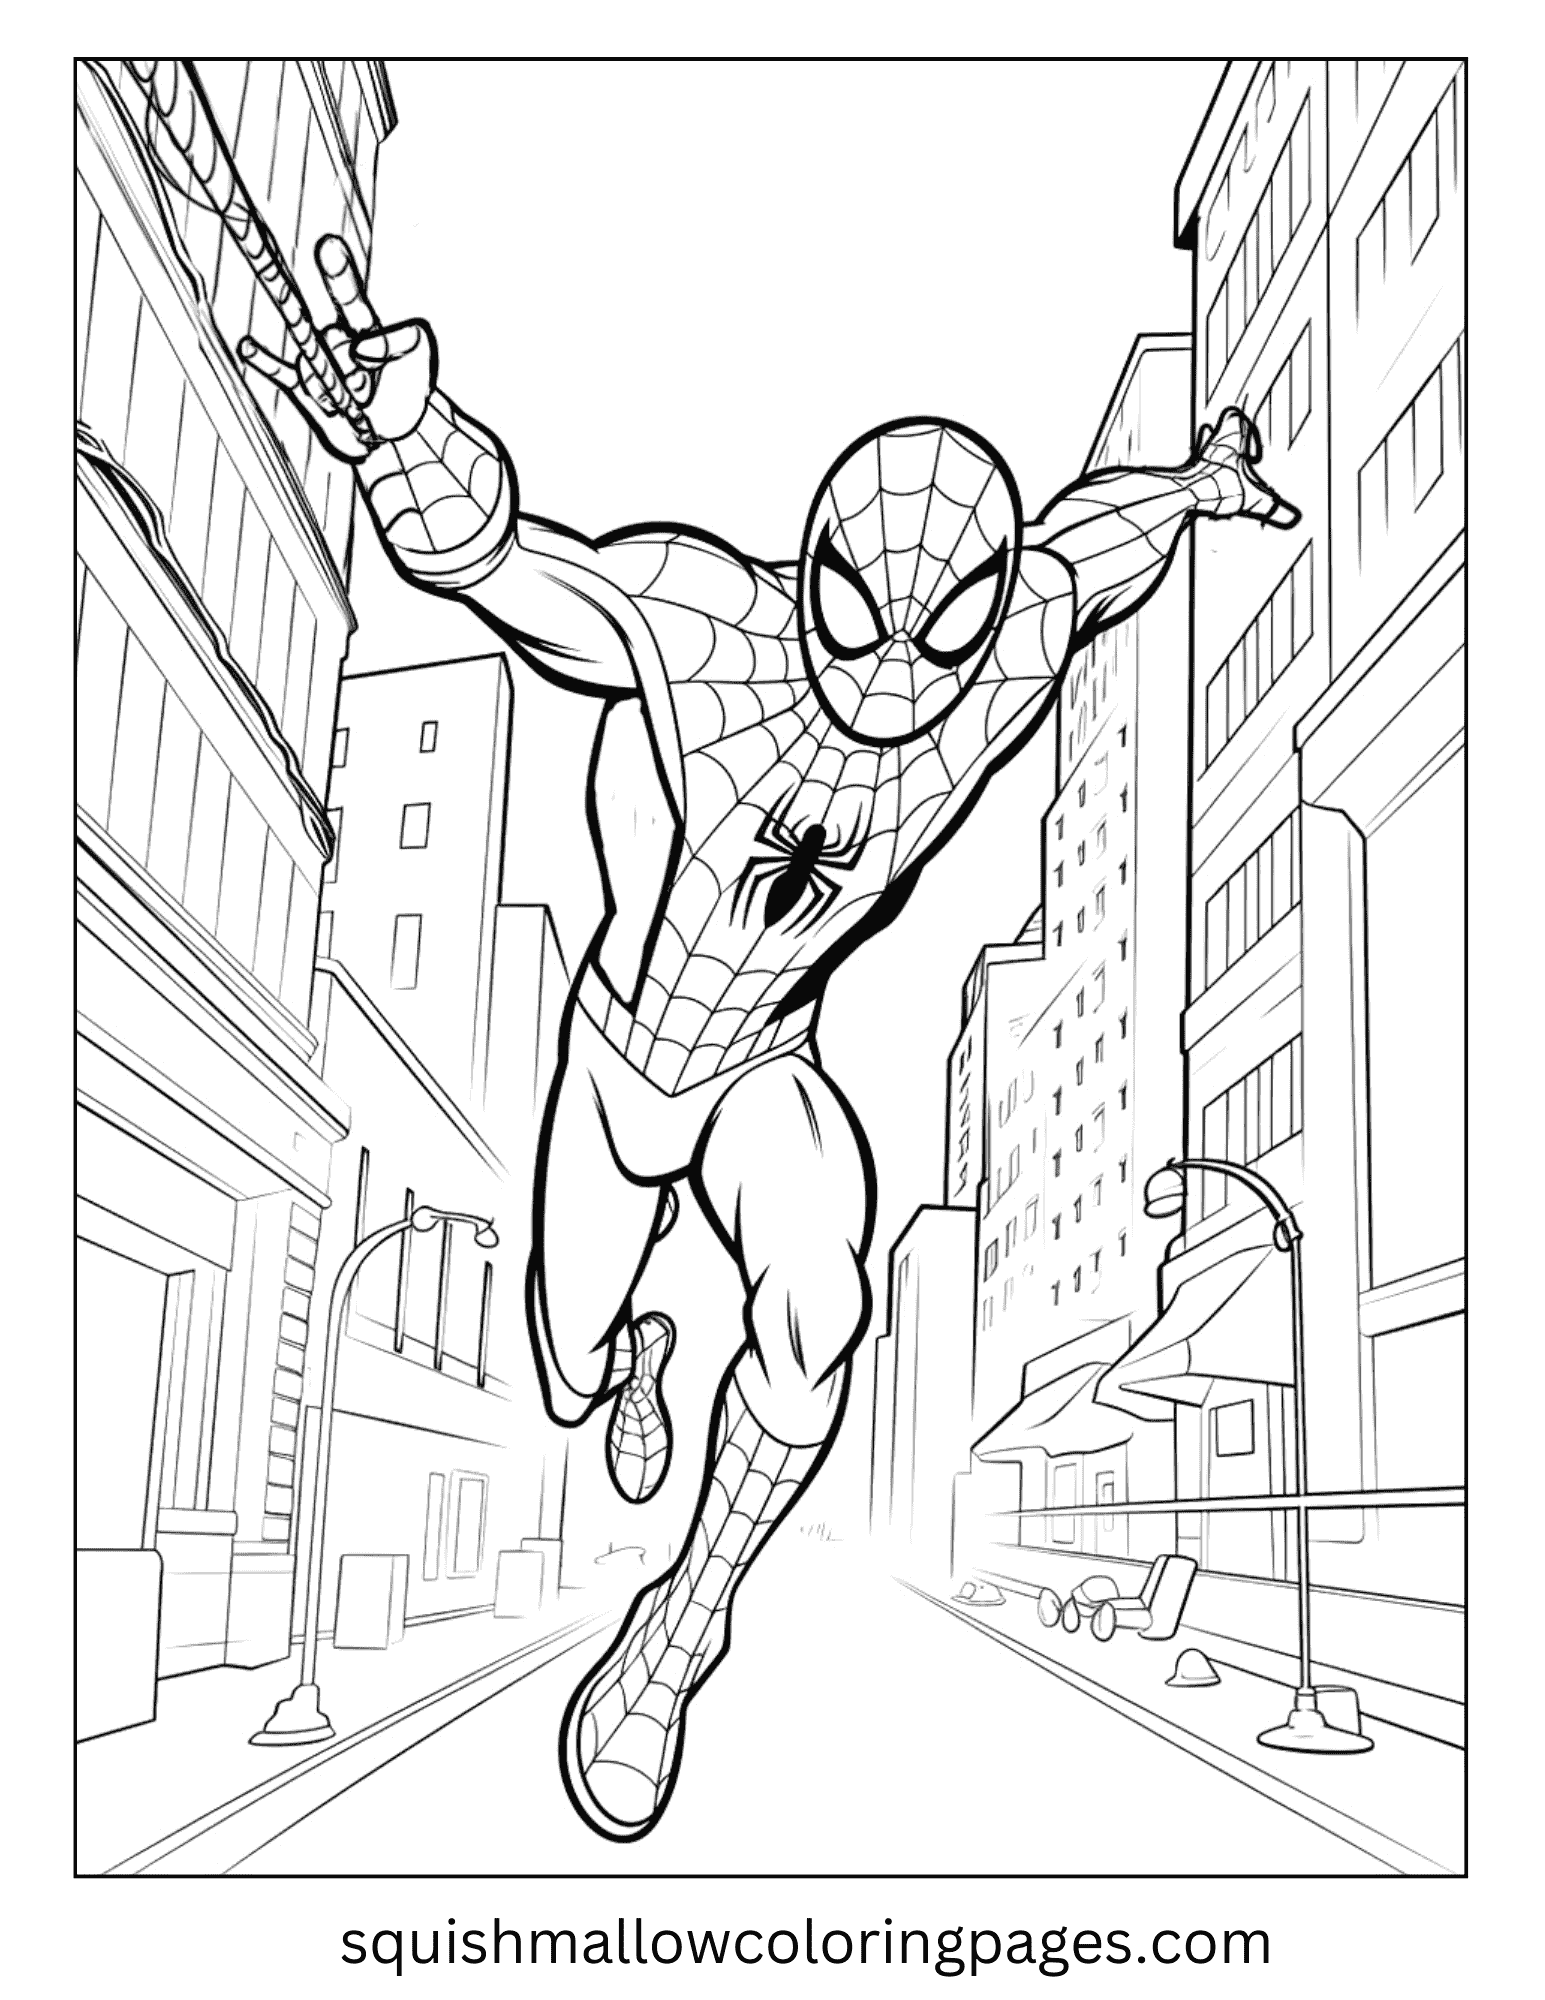 Spiderman Running on the street coloring pages